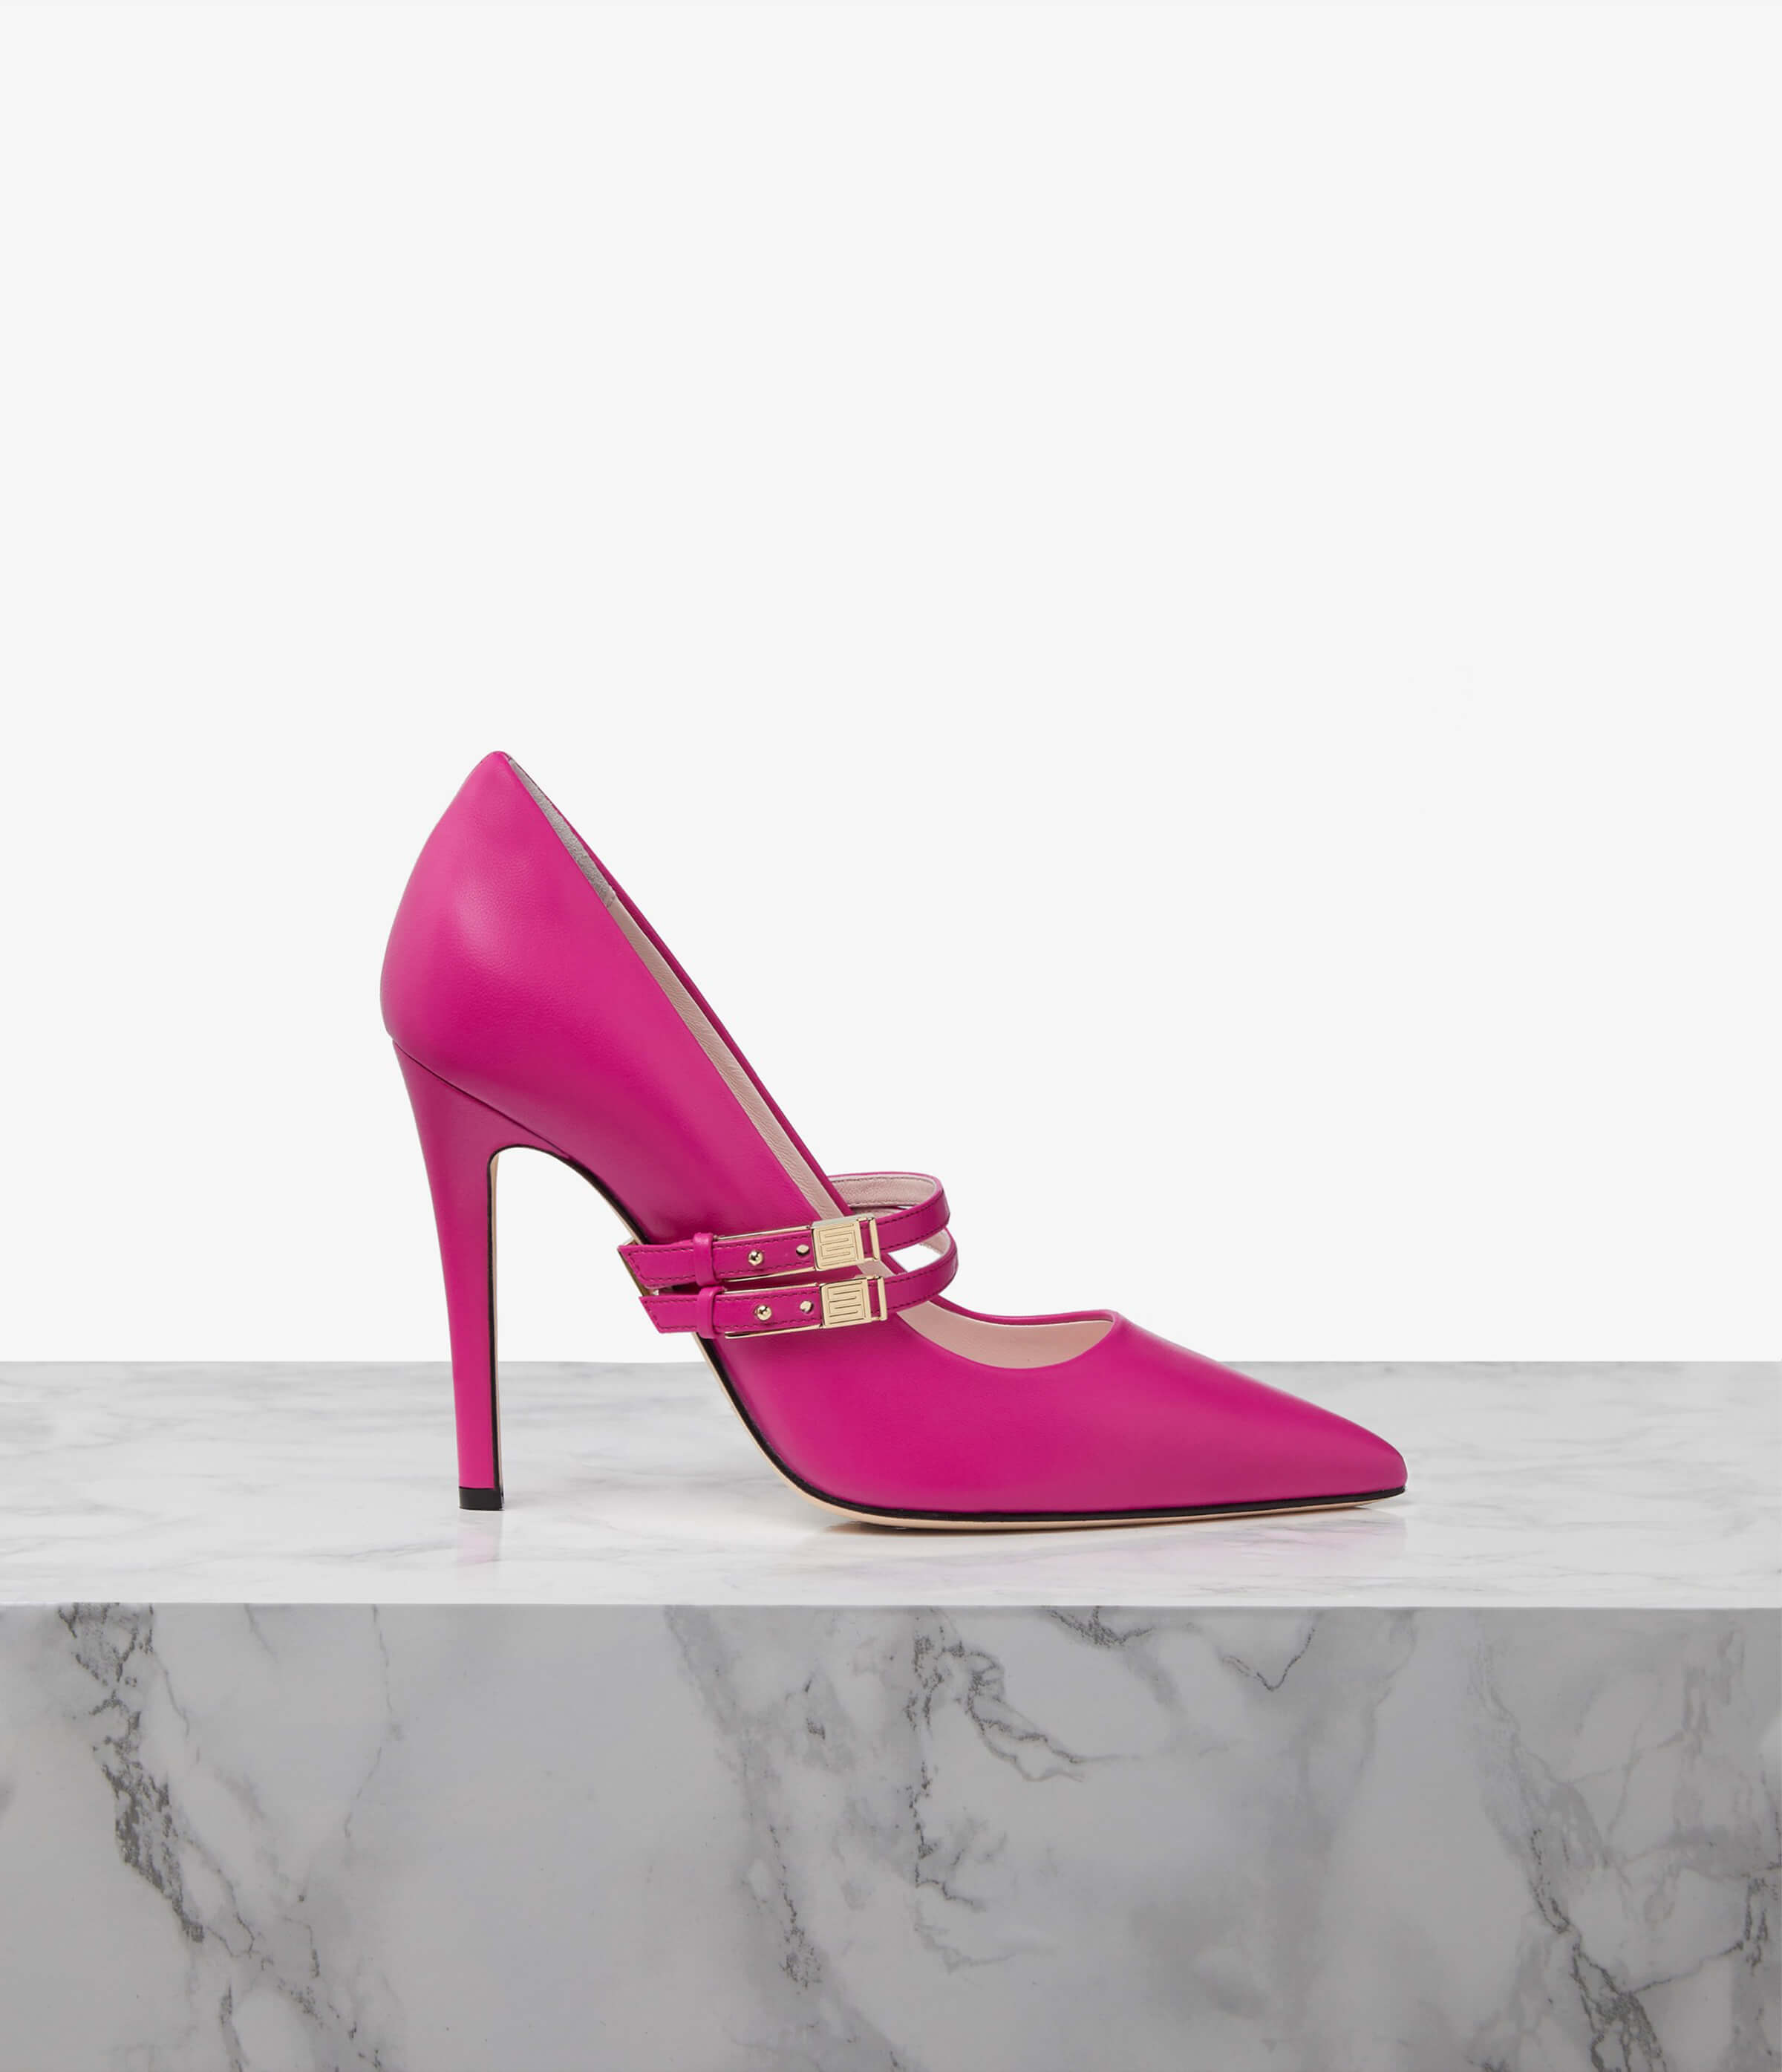 Does Numbing Cream Cure All High Heels Pains? — The Most Comfortable Heels